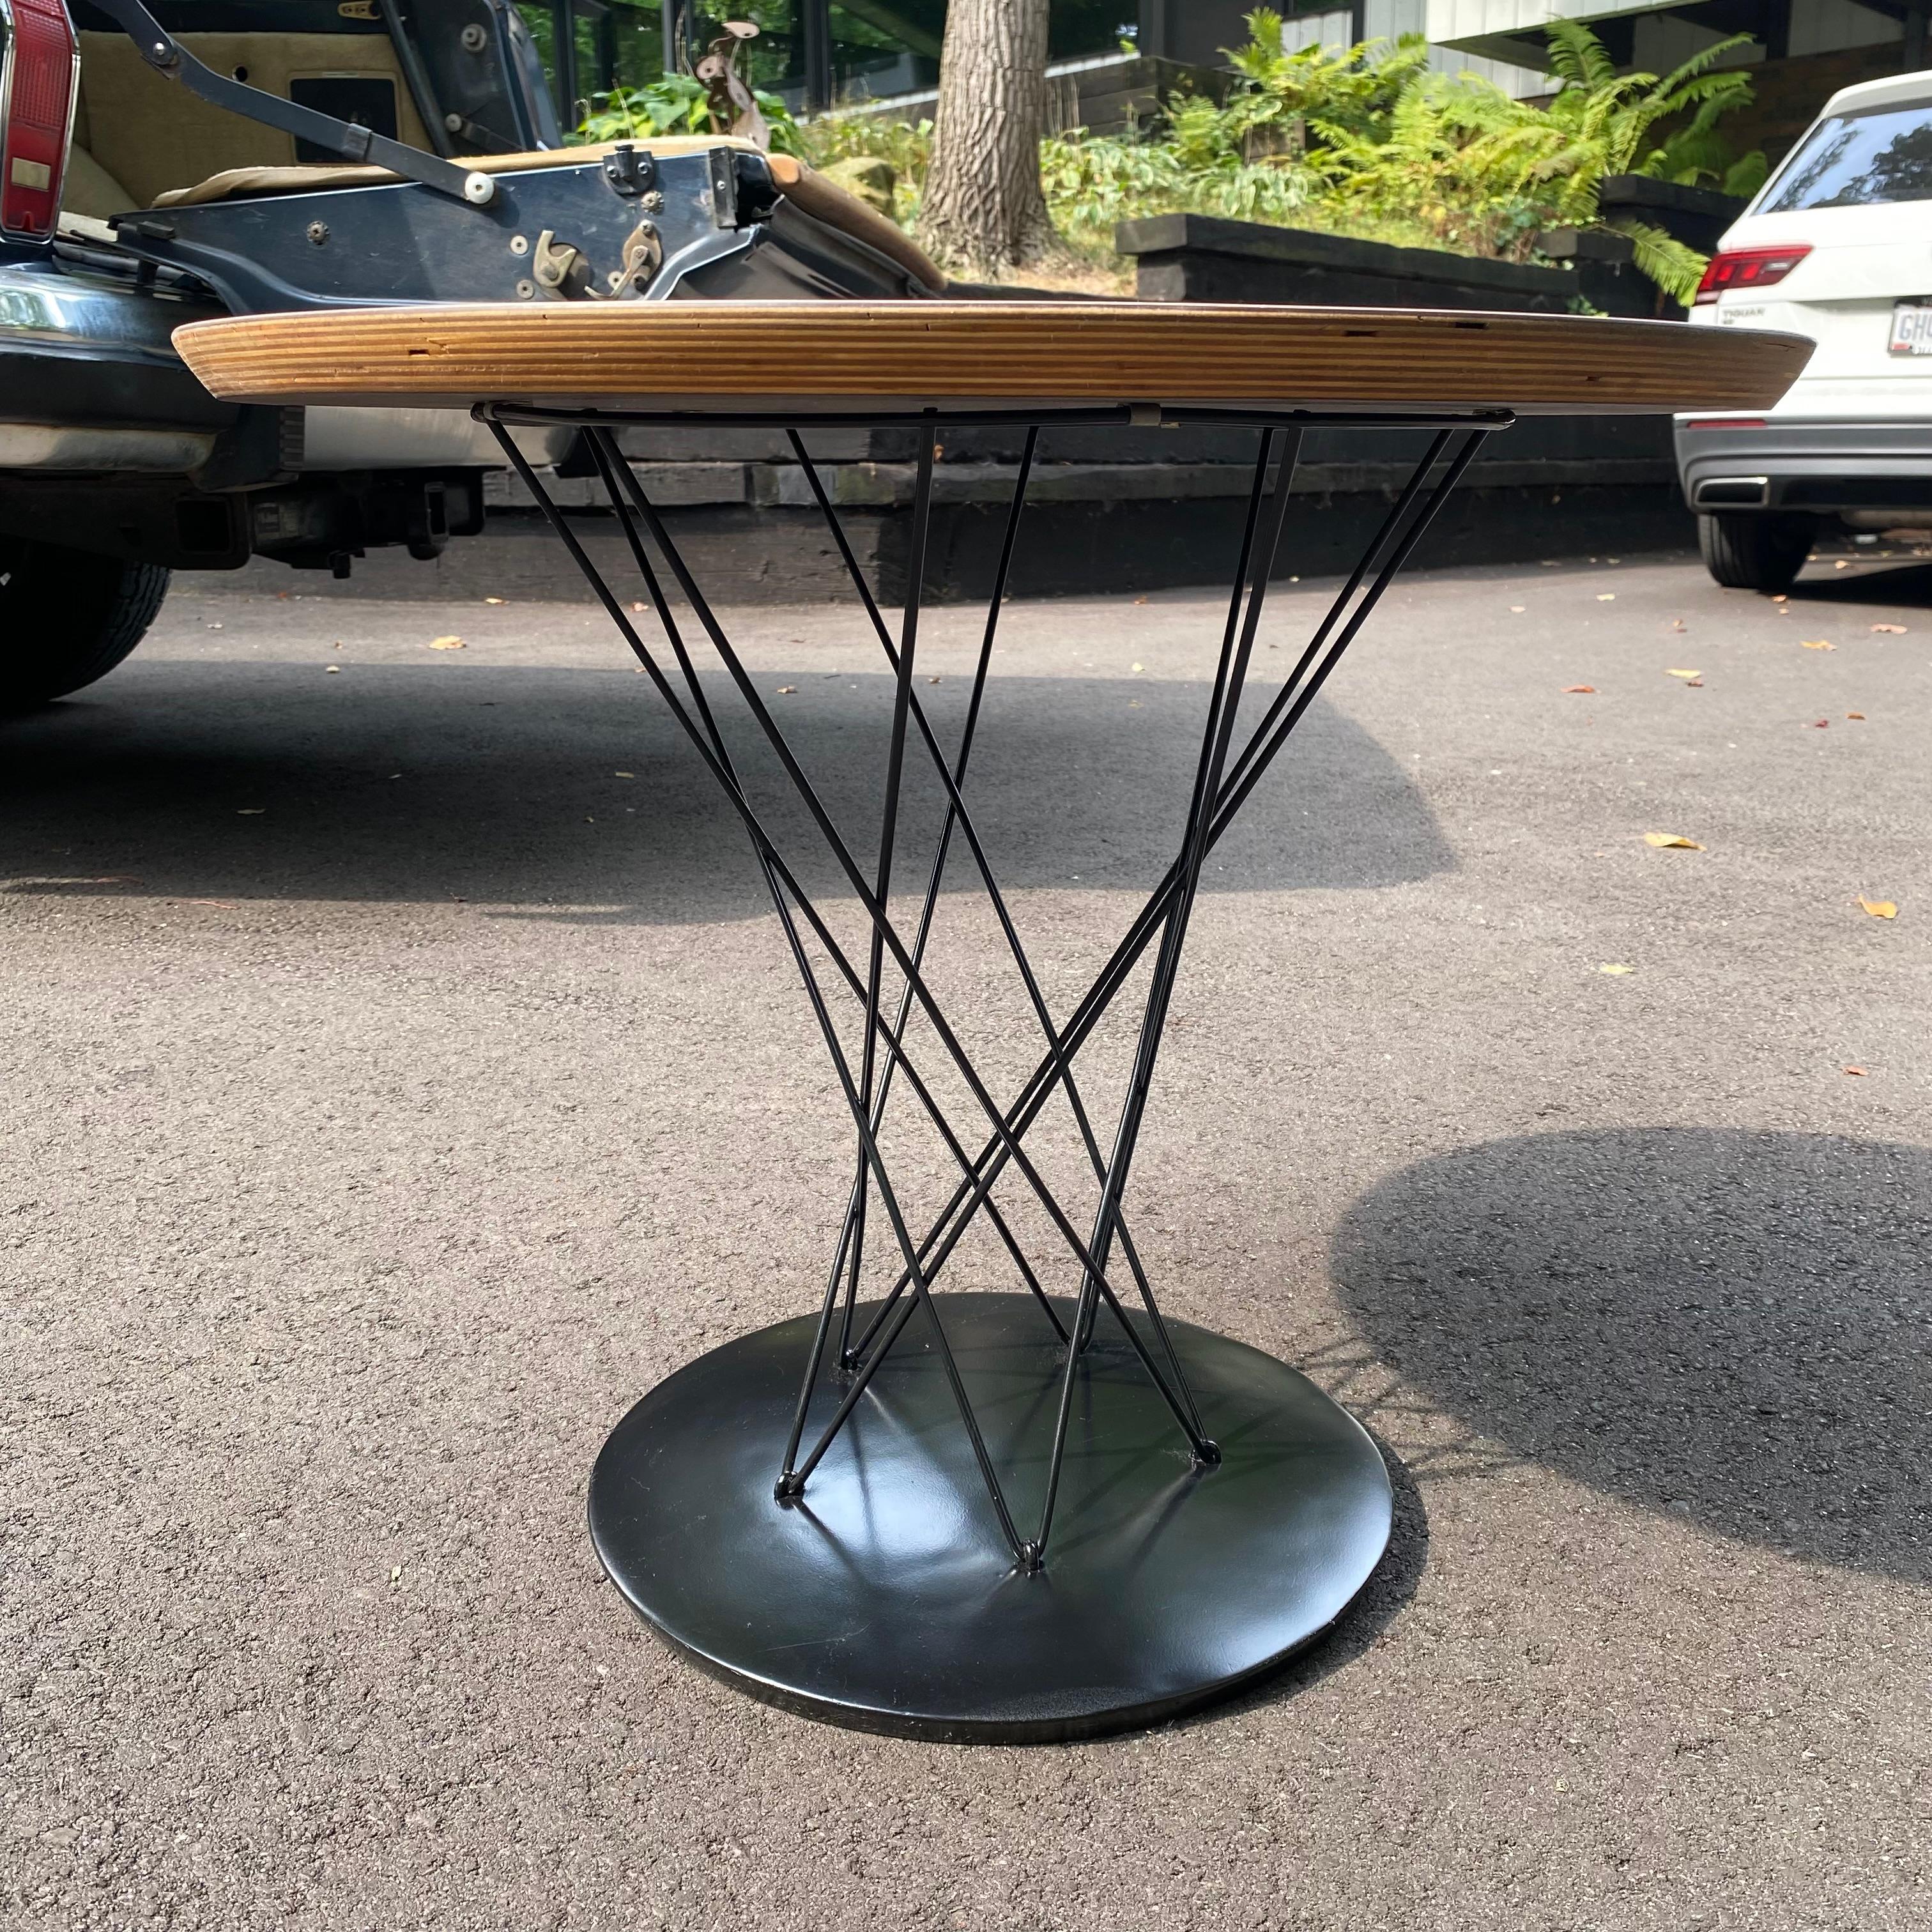 This is a really nice authentic Knoll Cyclone side table designed by Isamu Noguchi and first introduced in 1953. This table has a stacked laminate top, dating it to the 1950's. It has all the hallmarks of Knoll including the 